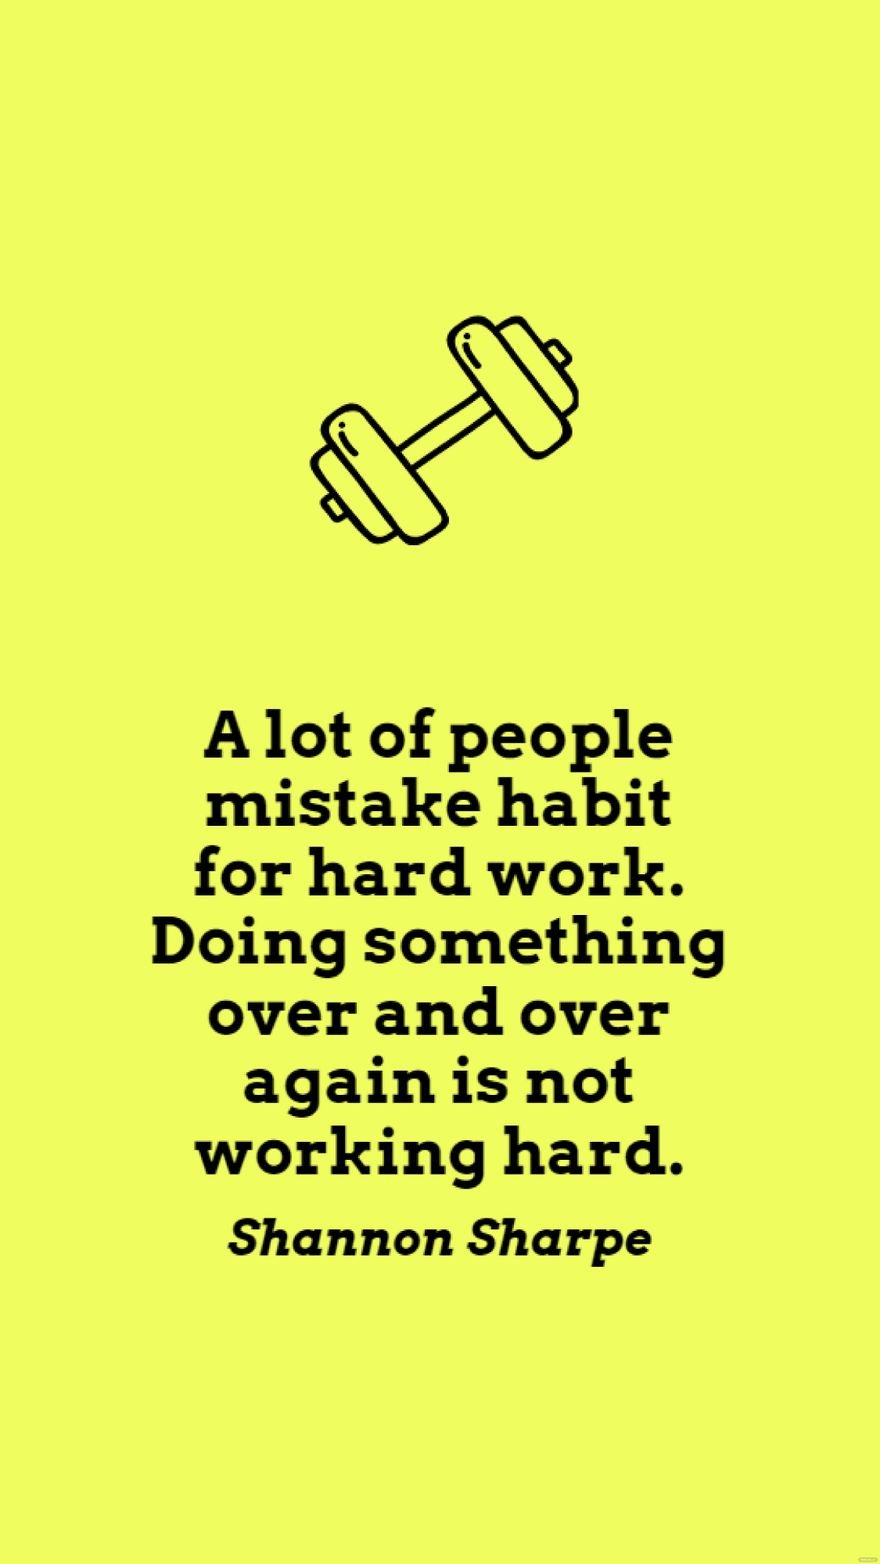 Shannon Sharpe - A lot of people mistake habit for hard work. Doing something over and over again is not working hard.